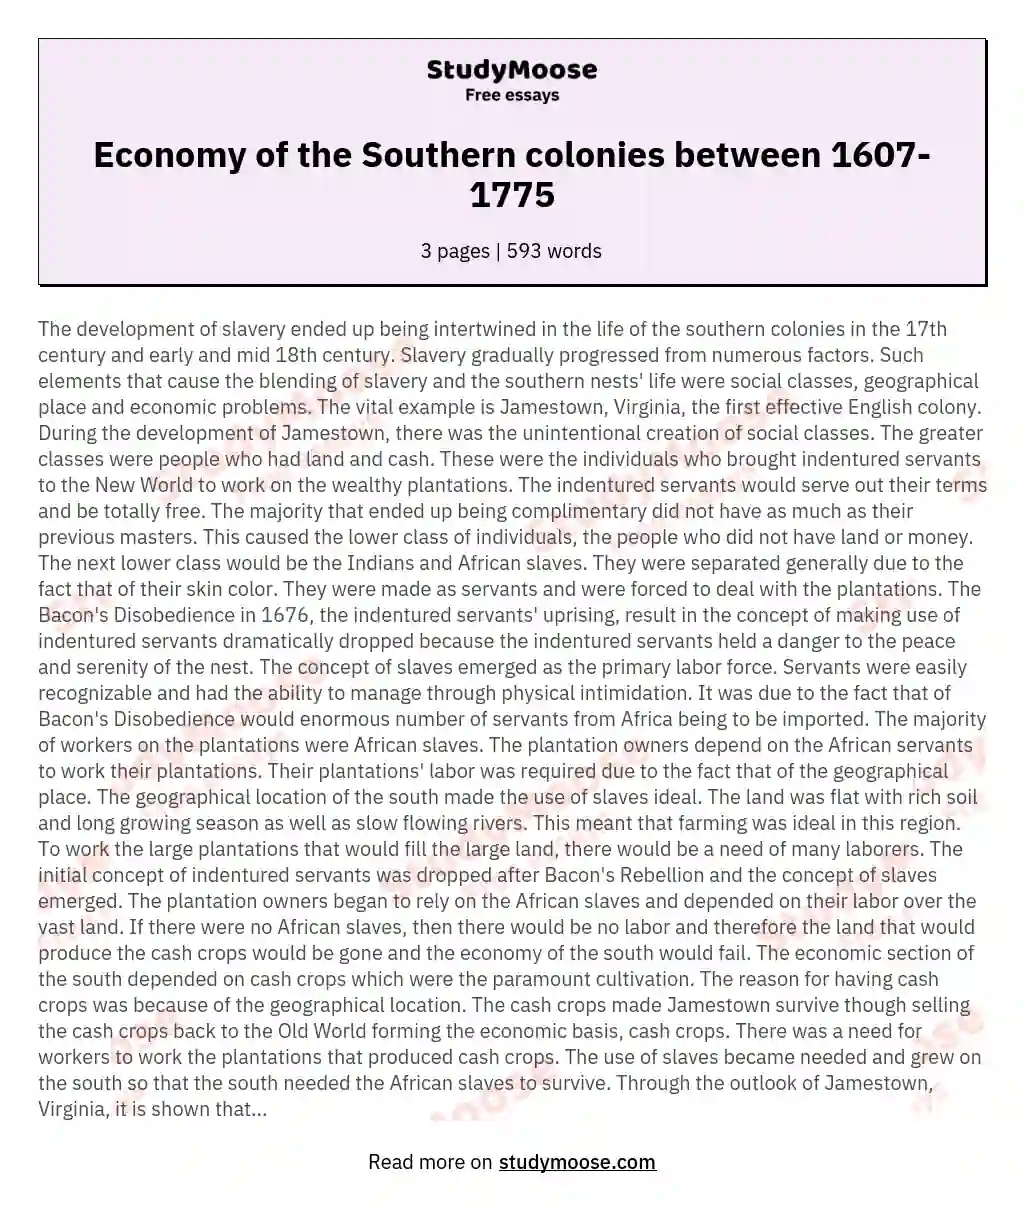 Economy of the Southern colonies between 1607-1775 essay